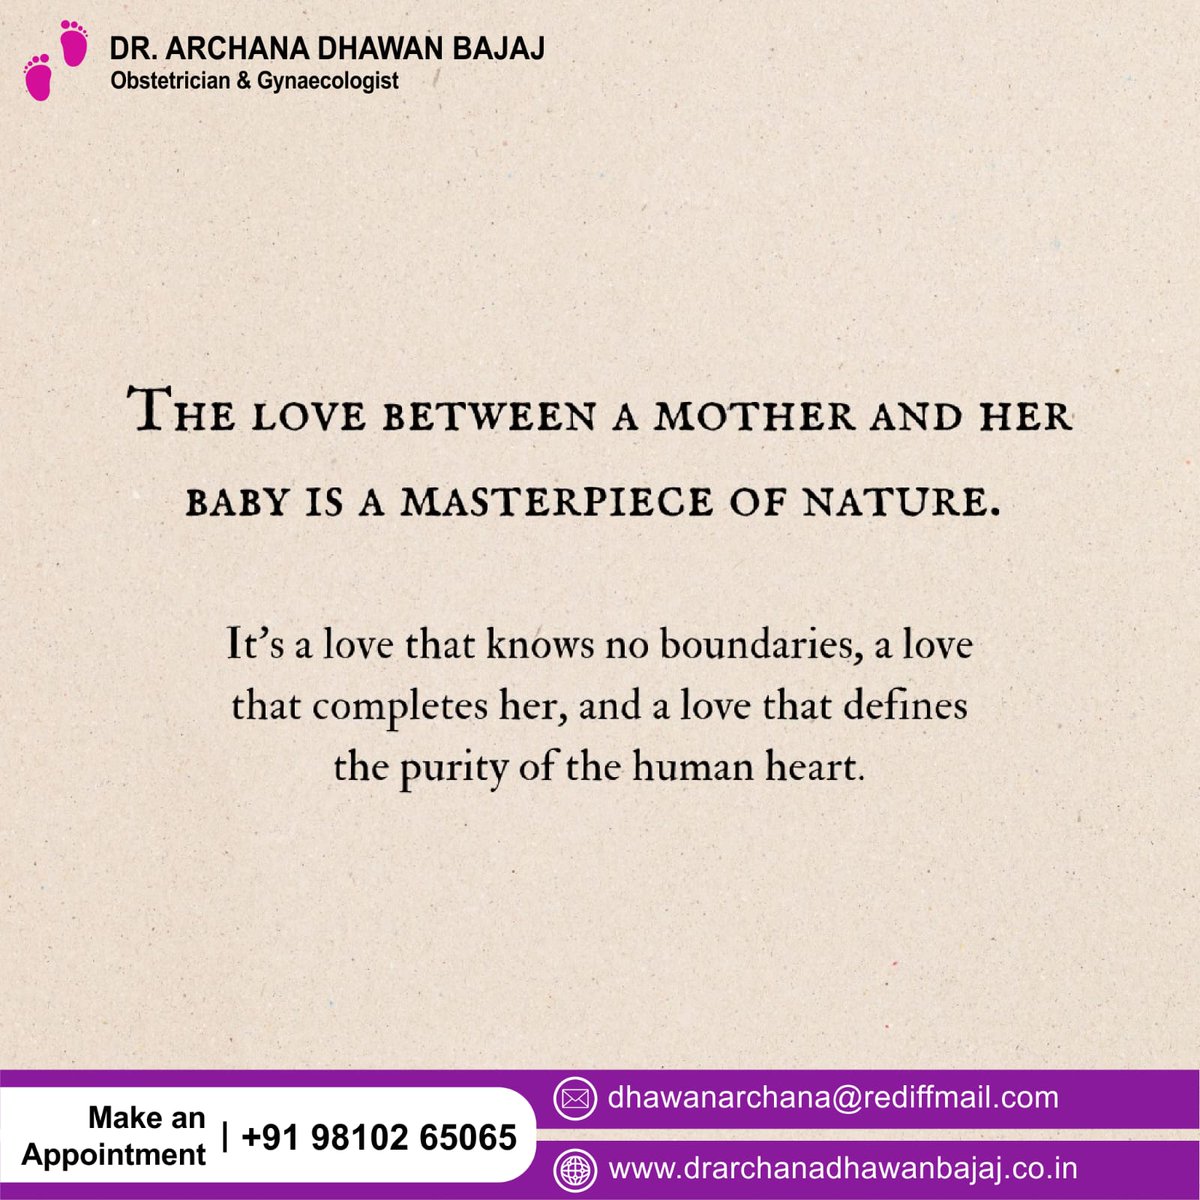 In the dance of life, a mother and baby share the most extraordinary moves of love. 💕 #MotherhoodMagic #SpecialBond

Make An Appointment: +91-9810265065
 
For information visit our website:
drarchanadhawanbajaj.co.in

 #ivfsupport #ivfsuccess #INDIA #IND #Australia #Bangladesh